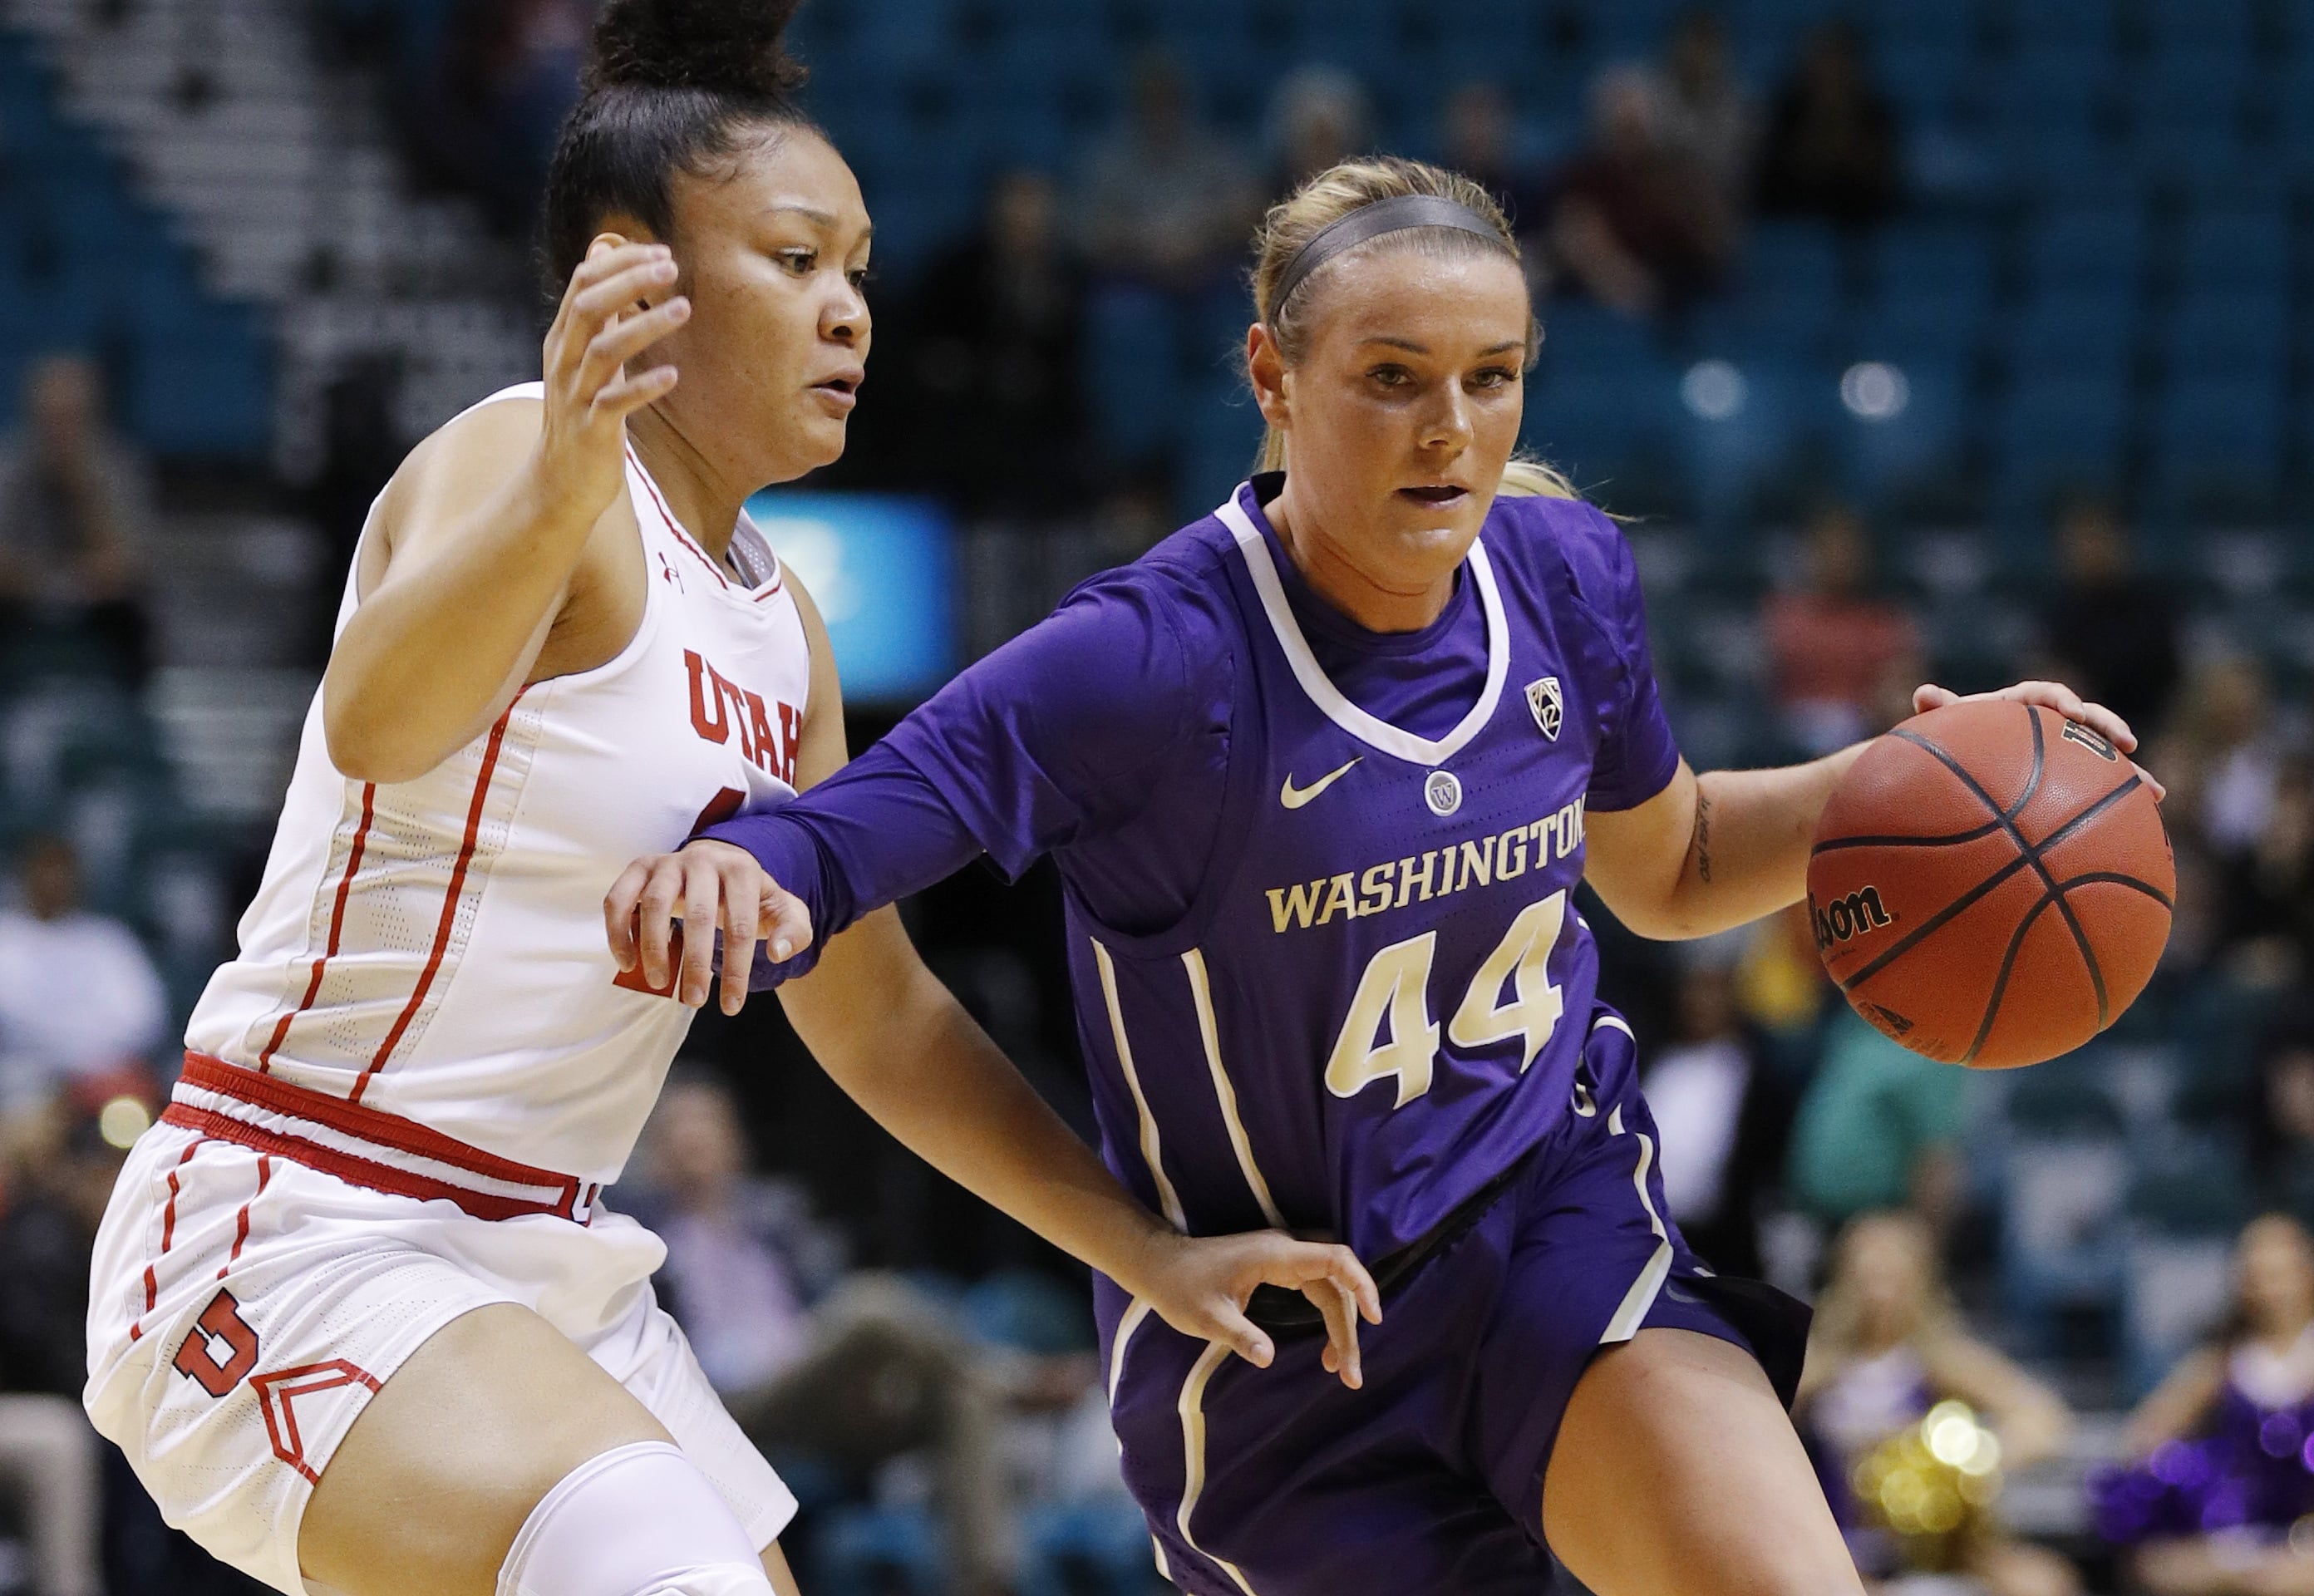 Washington's Missy Peterson drives around Utah's Sarah Porter during the first half of an NCAA college basketball game at the Pac-12 women's tournament Thursday, March 7, 2019, in Las Vegas.